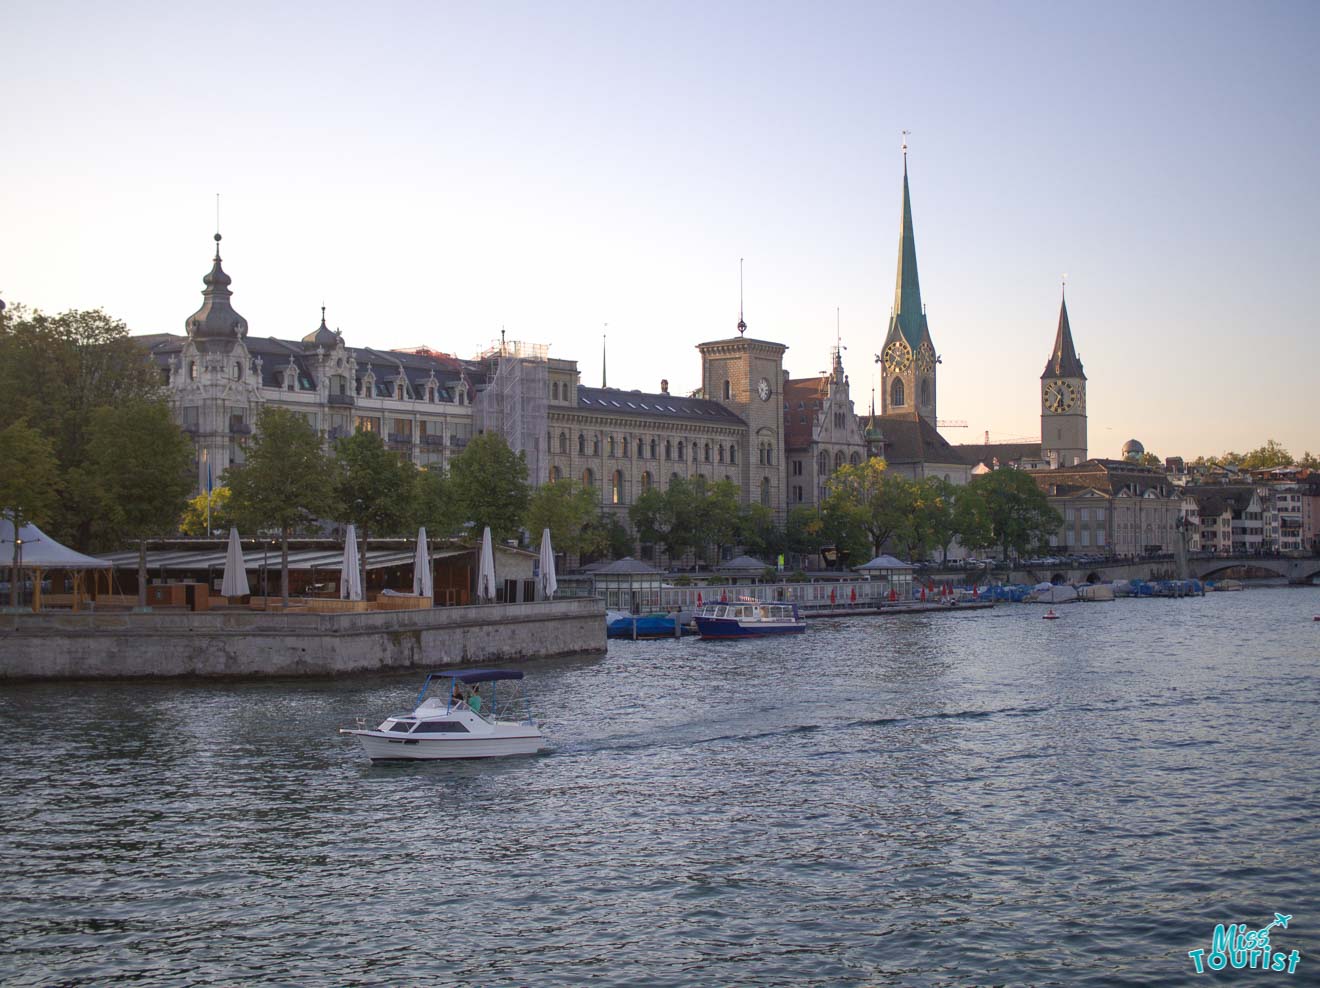 The serene waters of Lake Zurich in the evening, with the spires of Grossmünster church prominent in the background, and boats docked along a tree-lined quay.